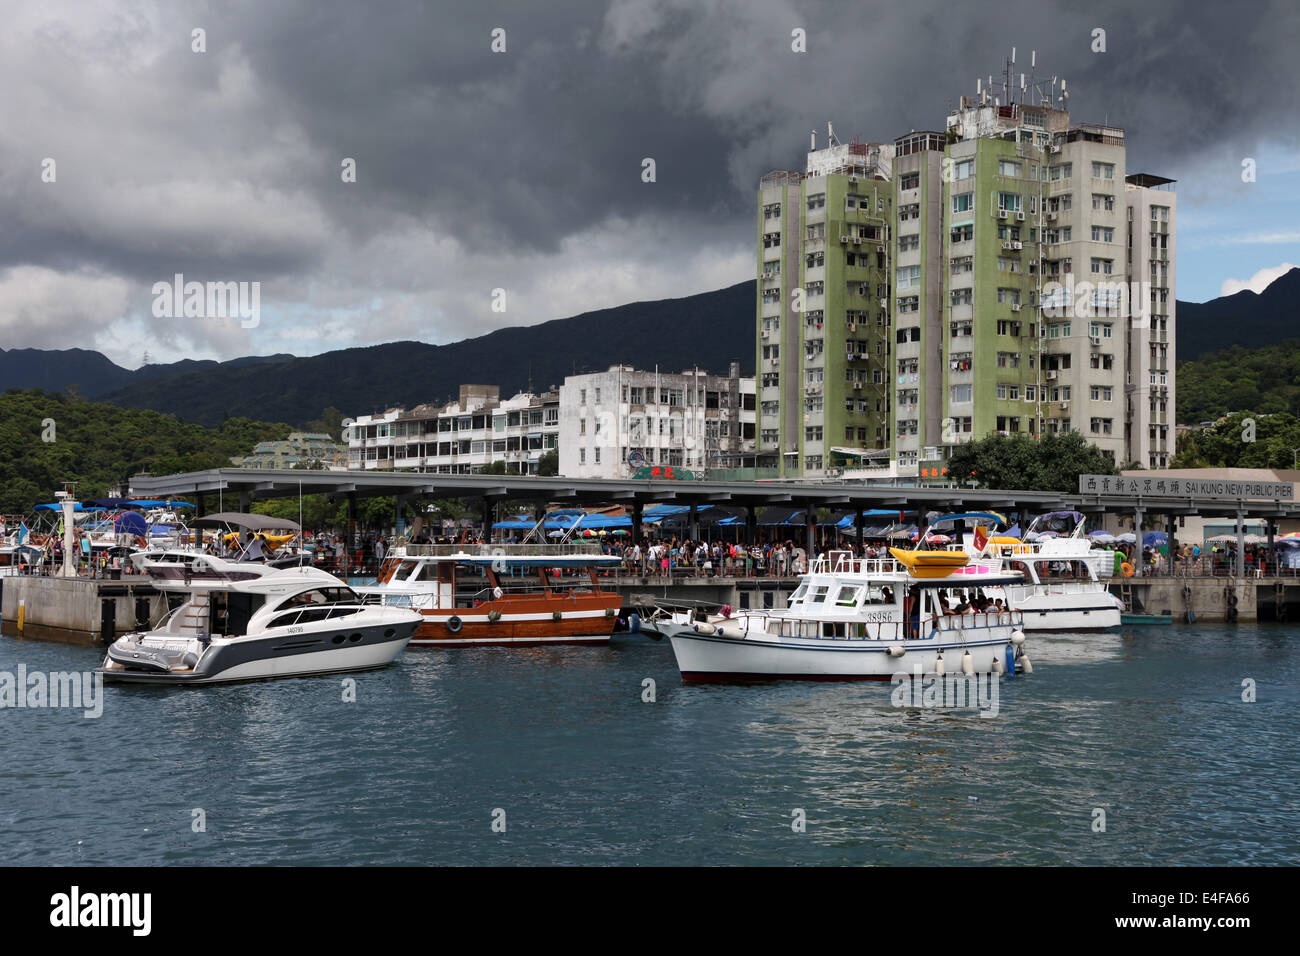 It's a photo of the harbor of Sai Kung in New Territories in Hong Kong, China. We can see boats and the sea Ocean. It's cloudy Stock Photo